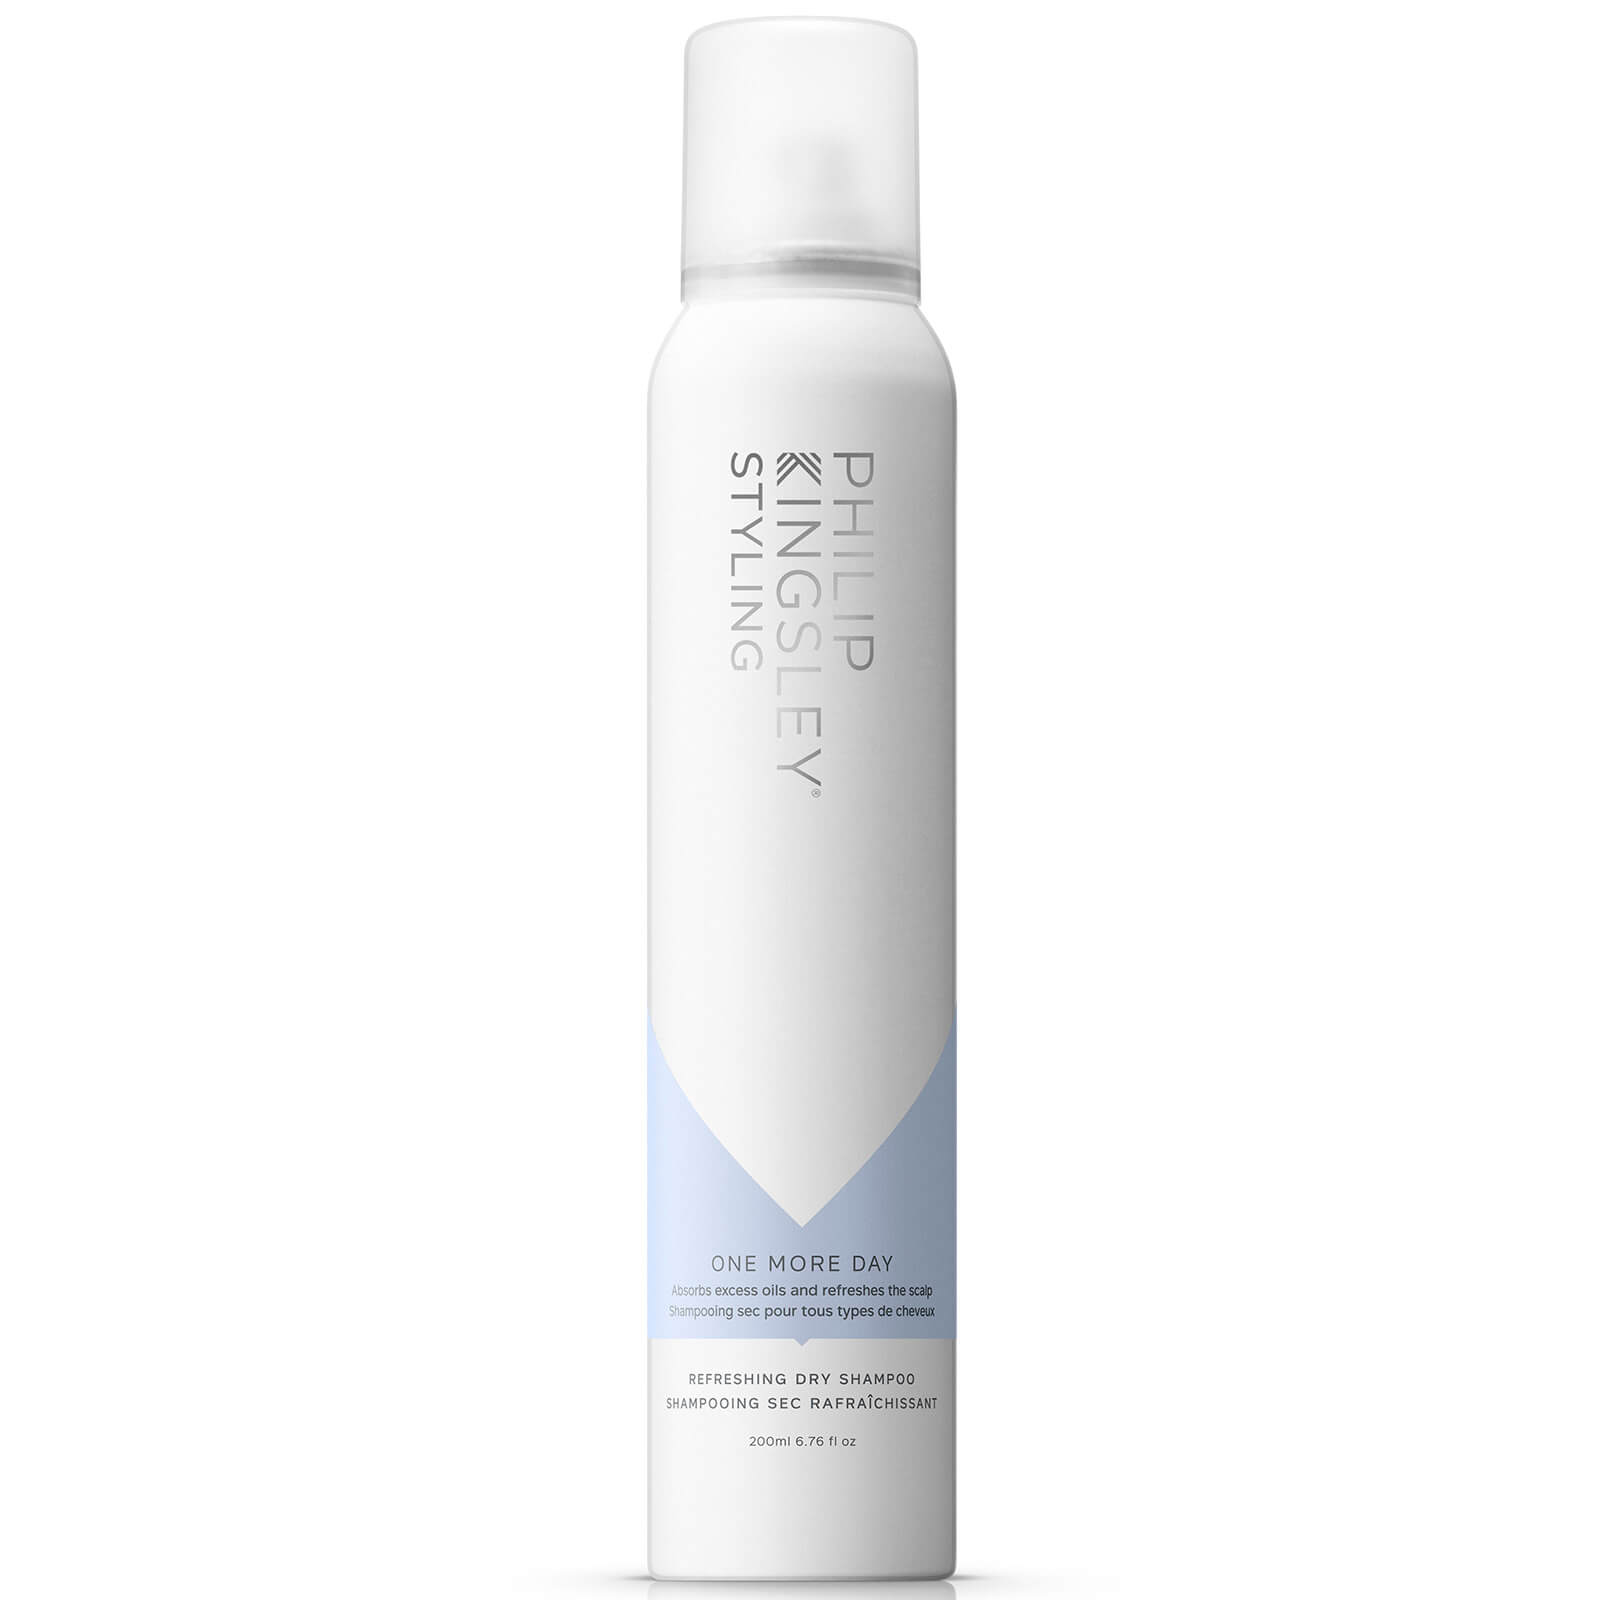 Photos - Hair Product Philip Kingsley One More Day Refreshing Dry Shampoo 200ml 